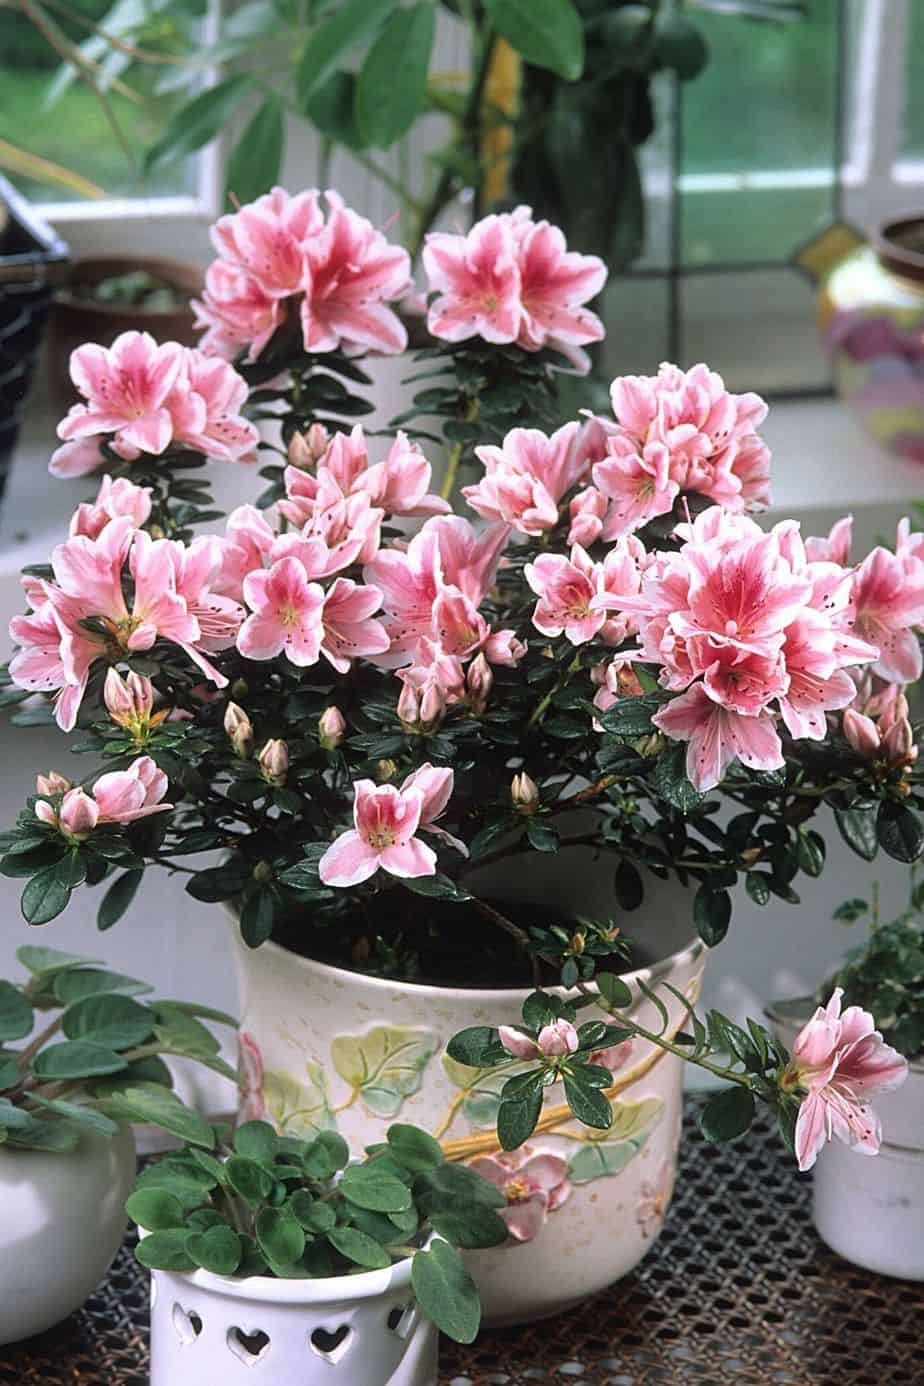 Azaleas contain grayanotoxins, which are compounds deemed extremely toxic for cats and dogs